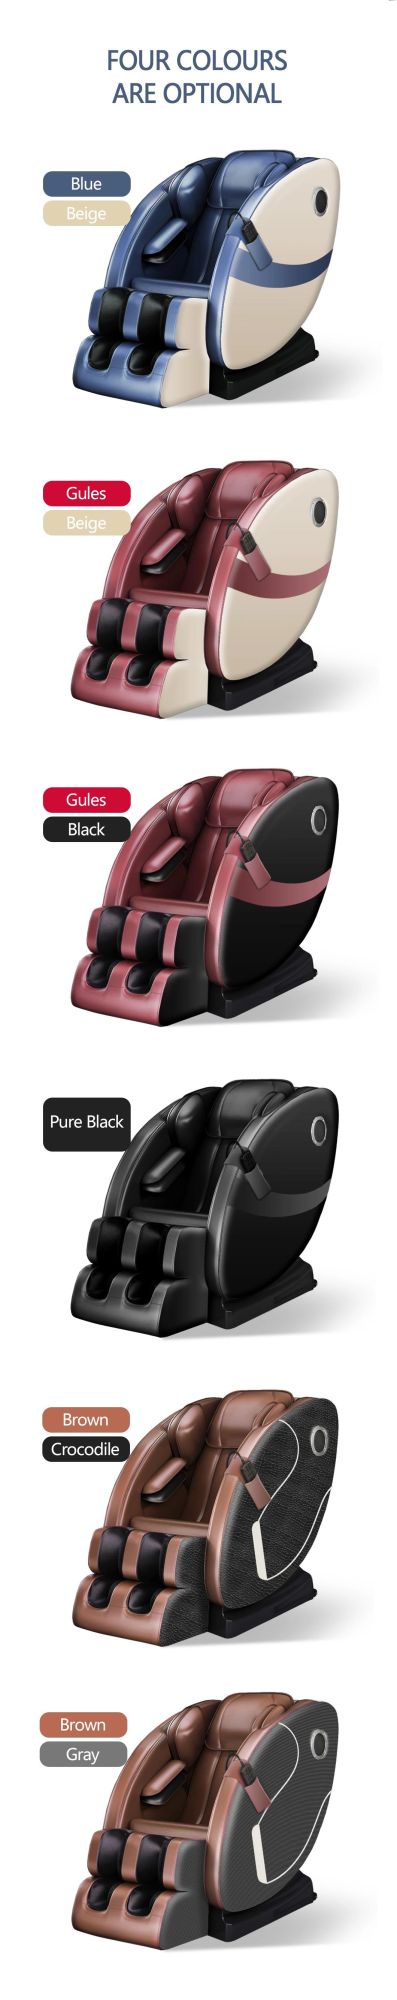 China Manufacturer High Quality Body Care Luxury Family Healthcare Massage Chair